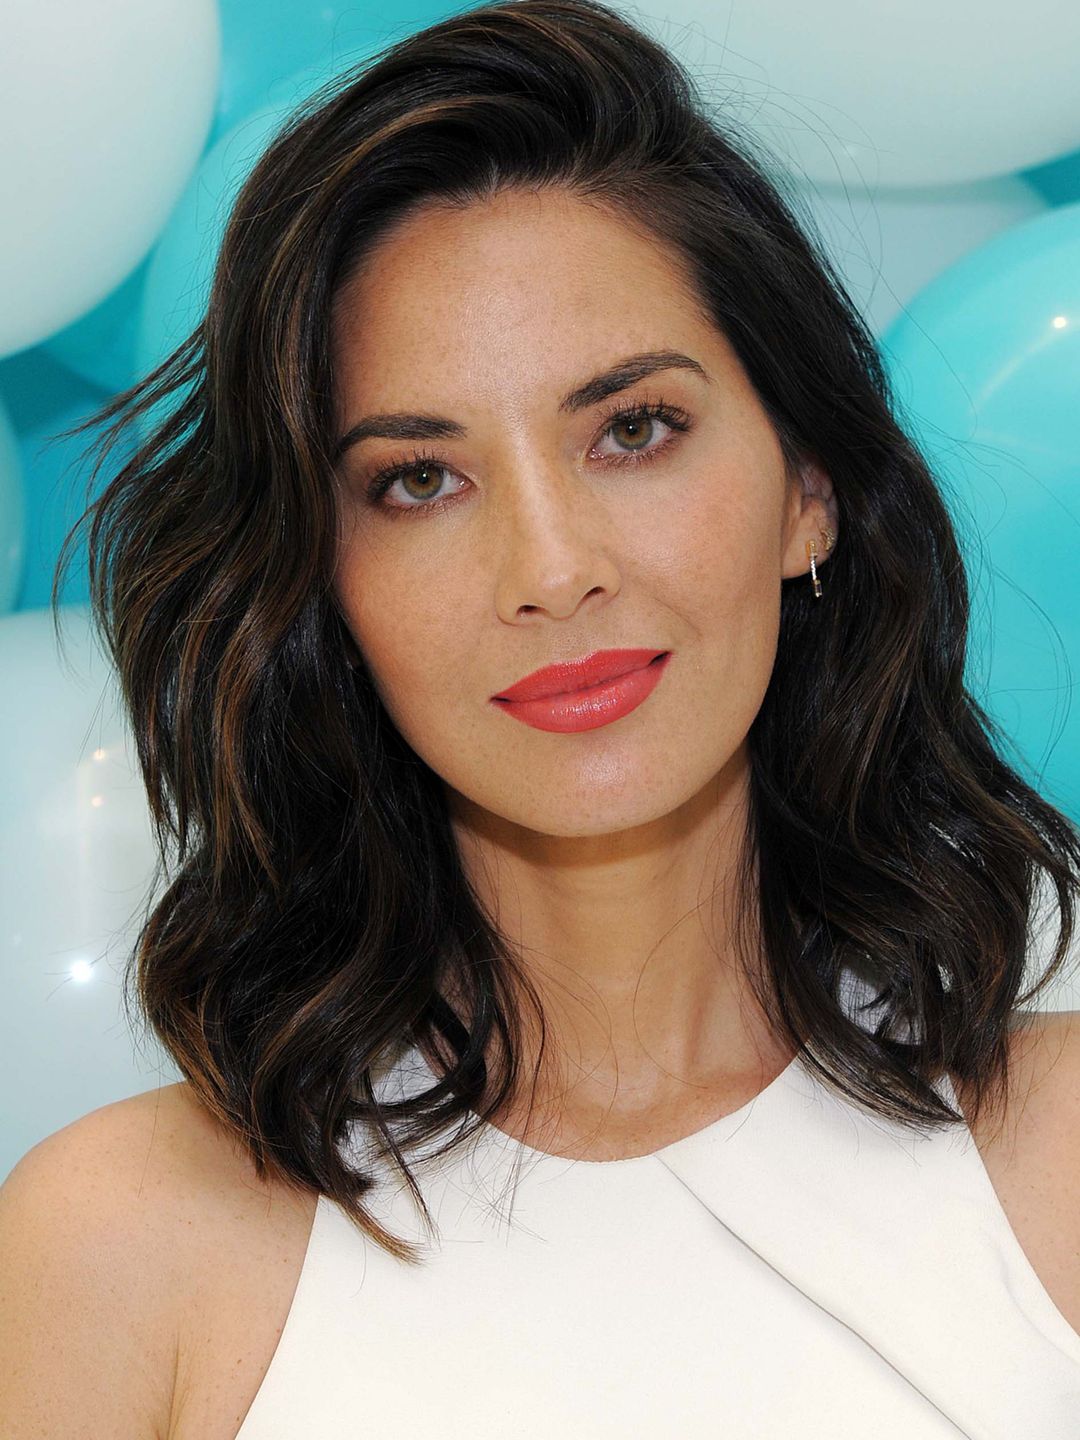 Olivia Munn who is her mother